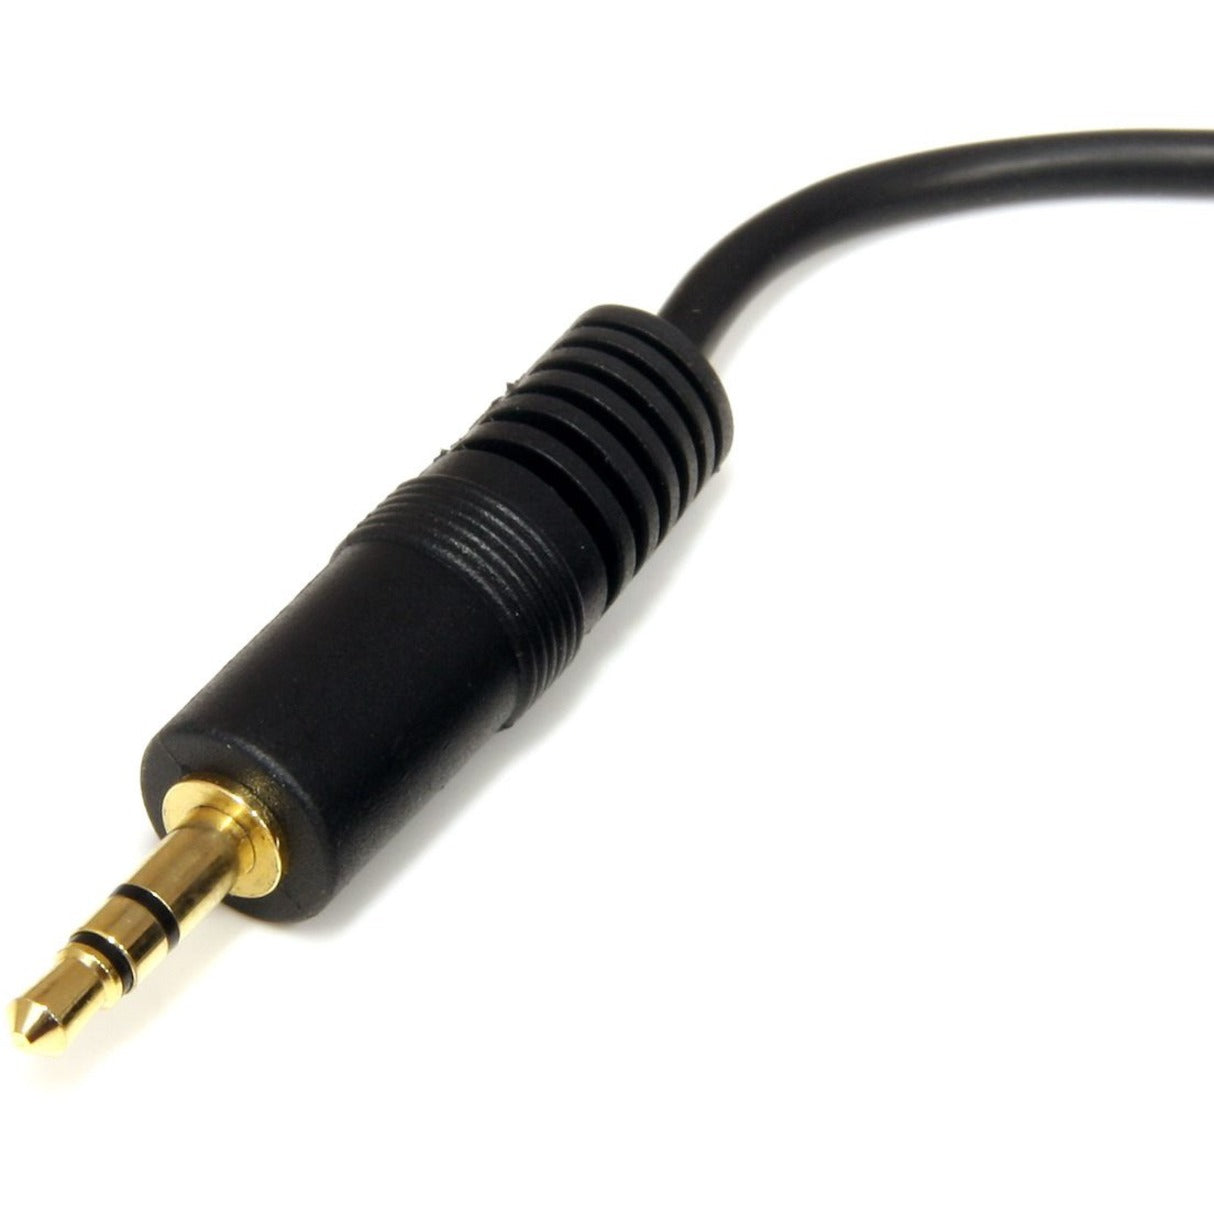 StarTech.com MU6MM 6 ft 3.5mm Stereo Extension Audio Cable, Copper Conductor, Male to Male, Black